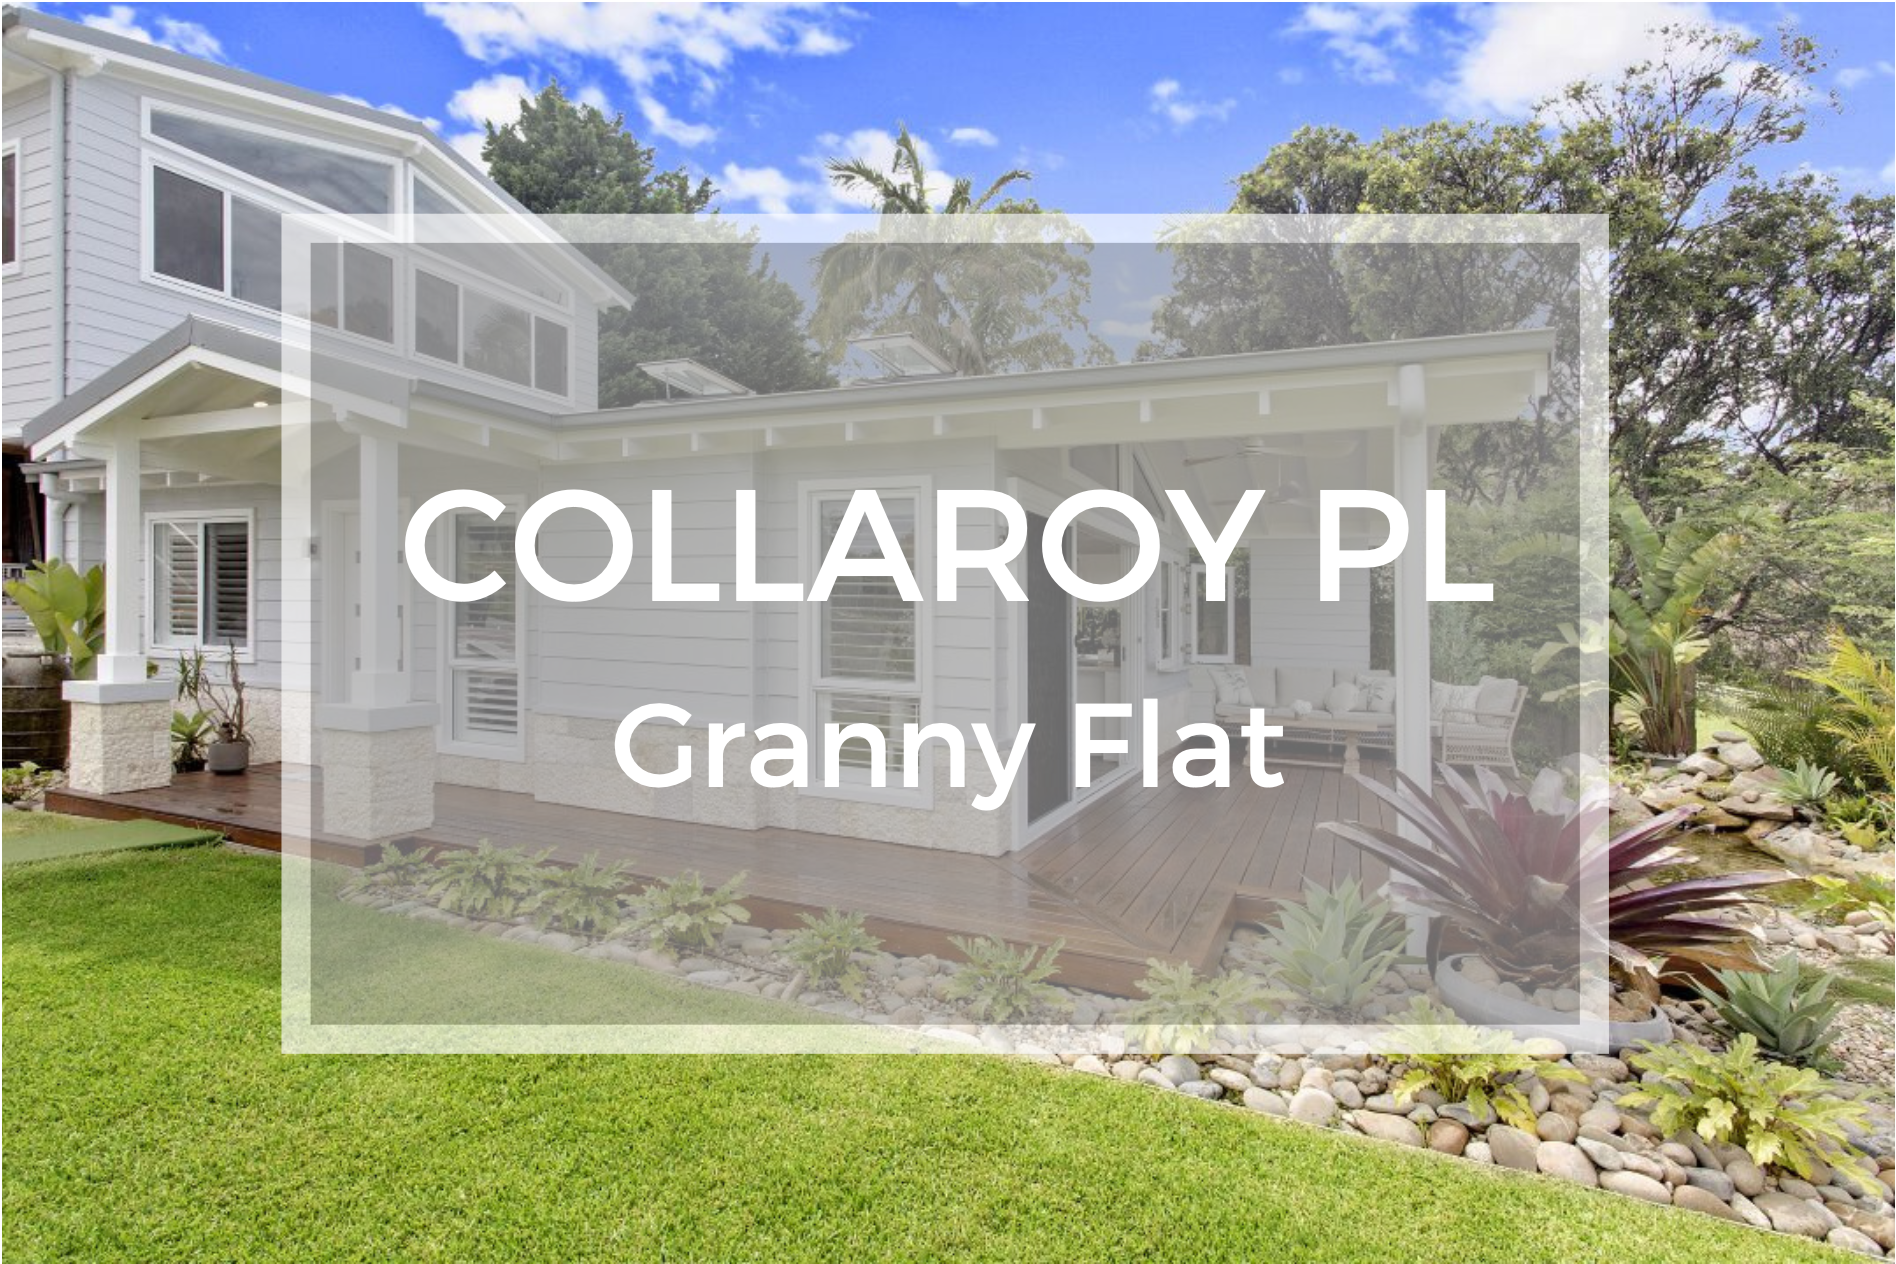 Collaroy Plateau Bungalow Homes Granny Flats.png